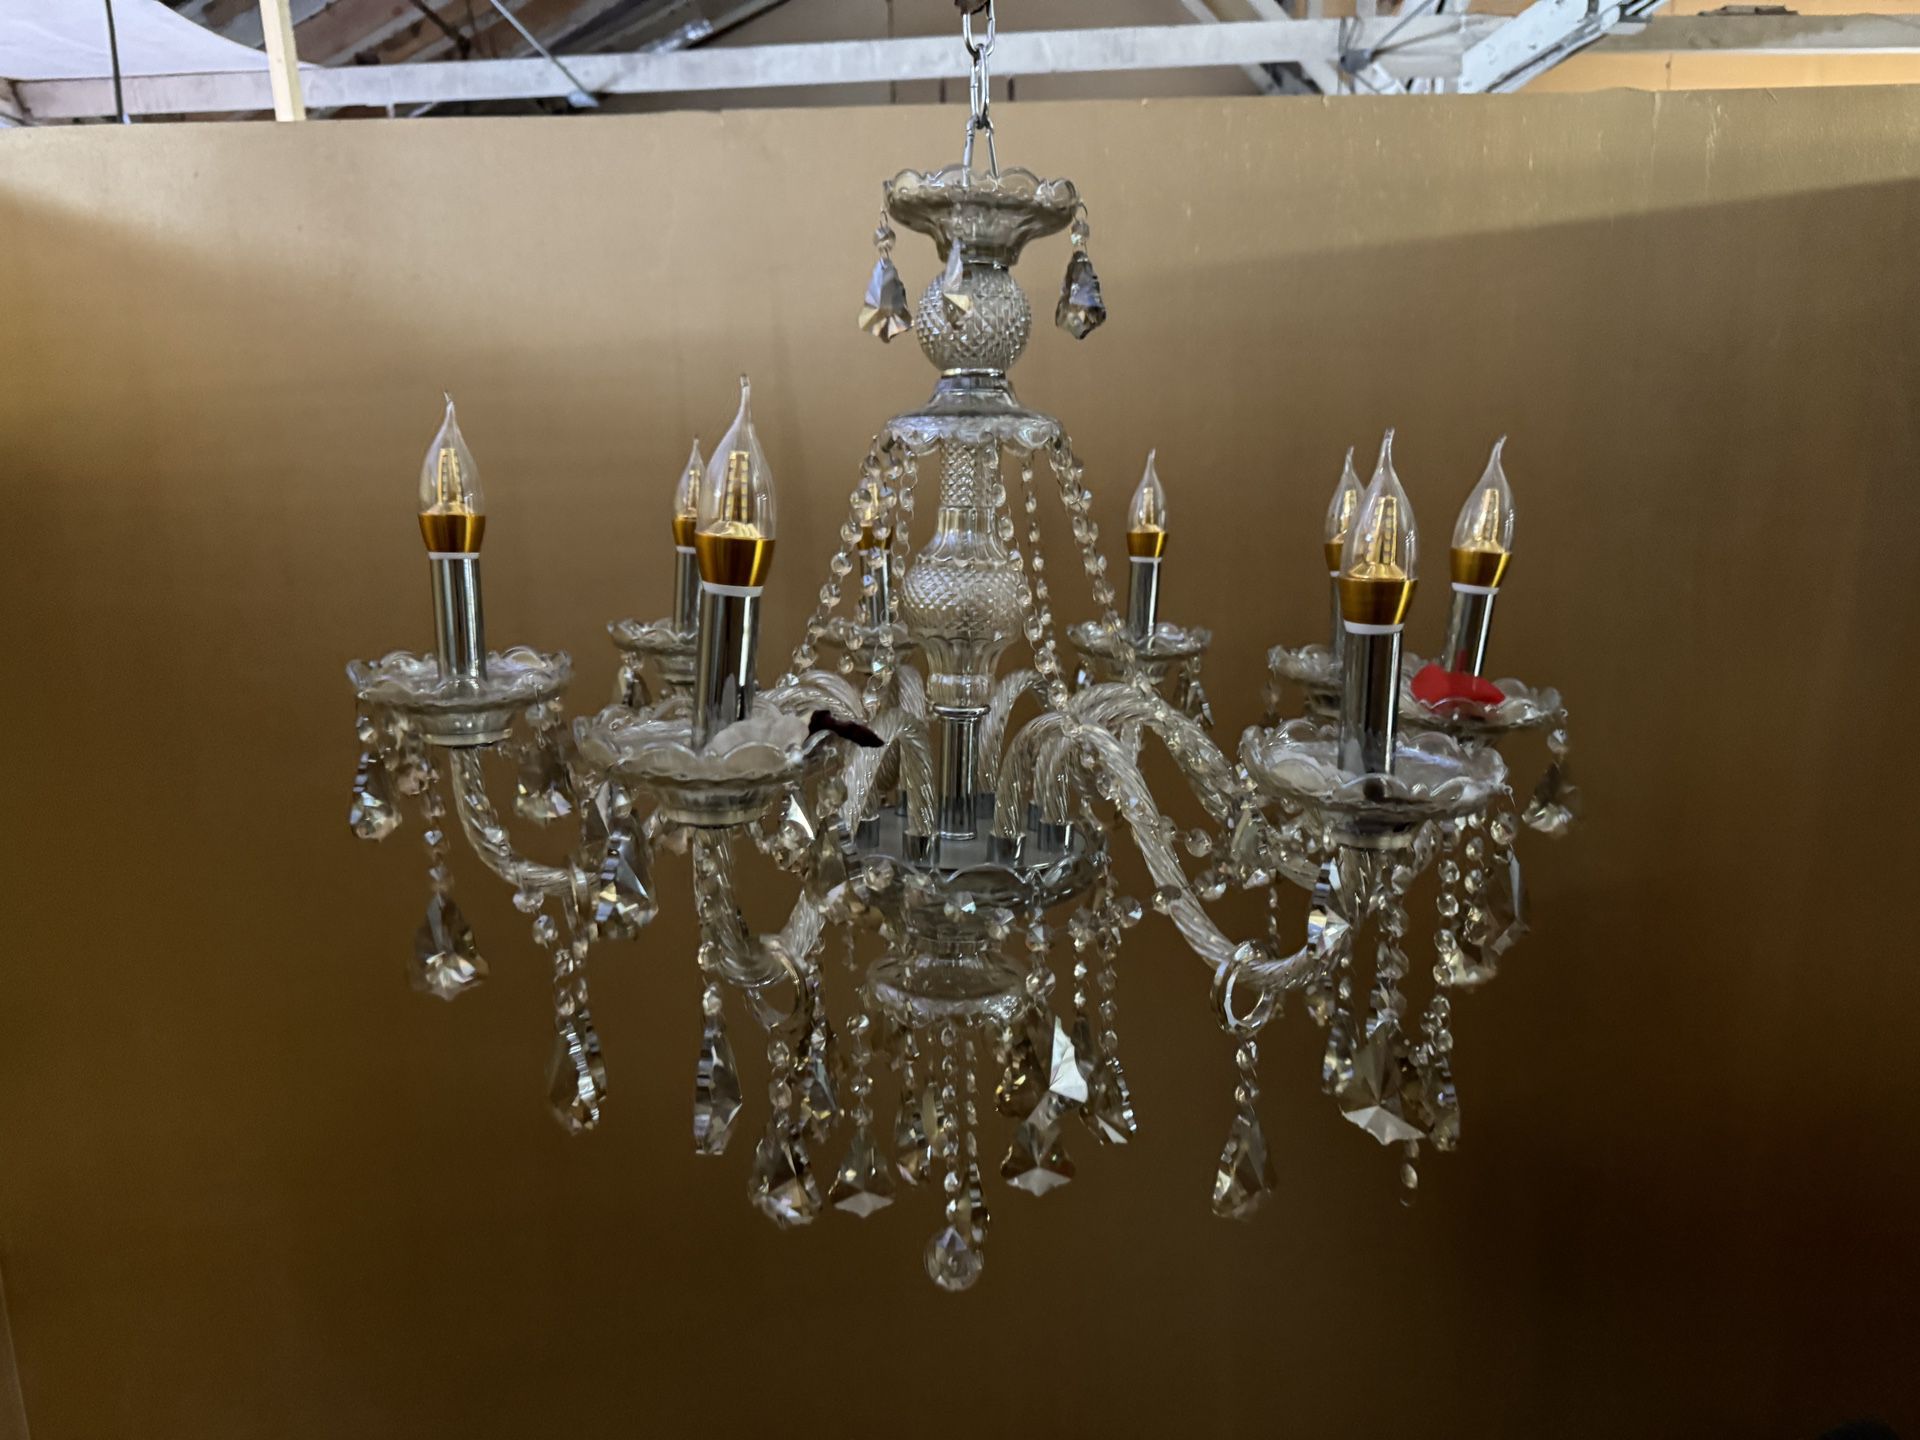 Glass Jeweled Vintage-Style Chandelier